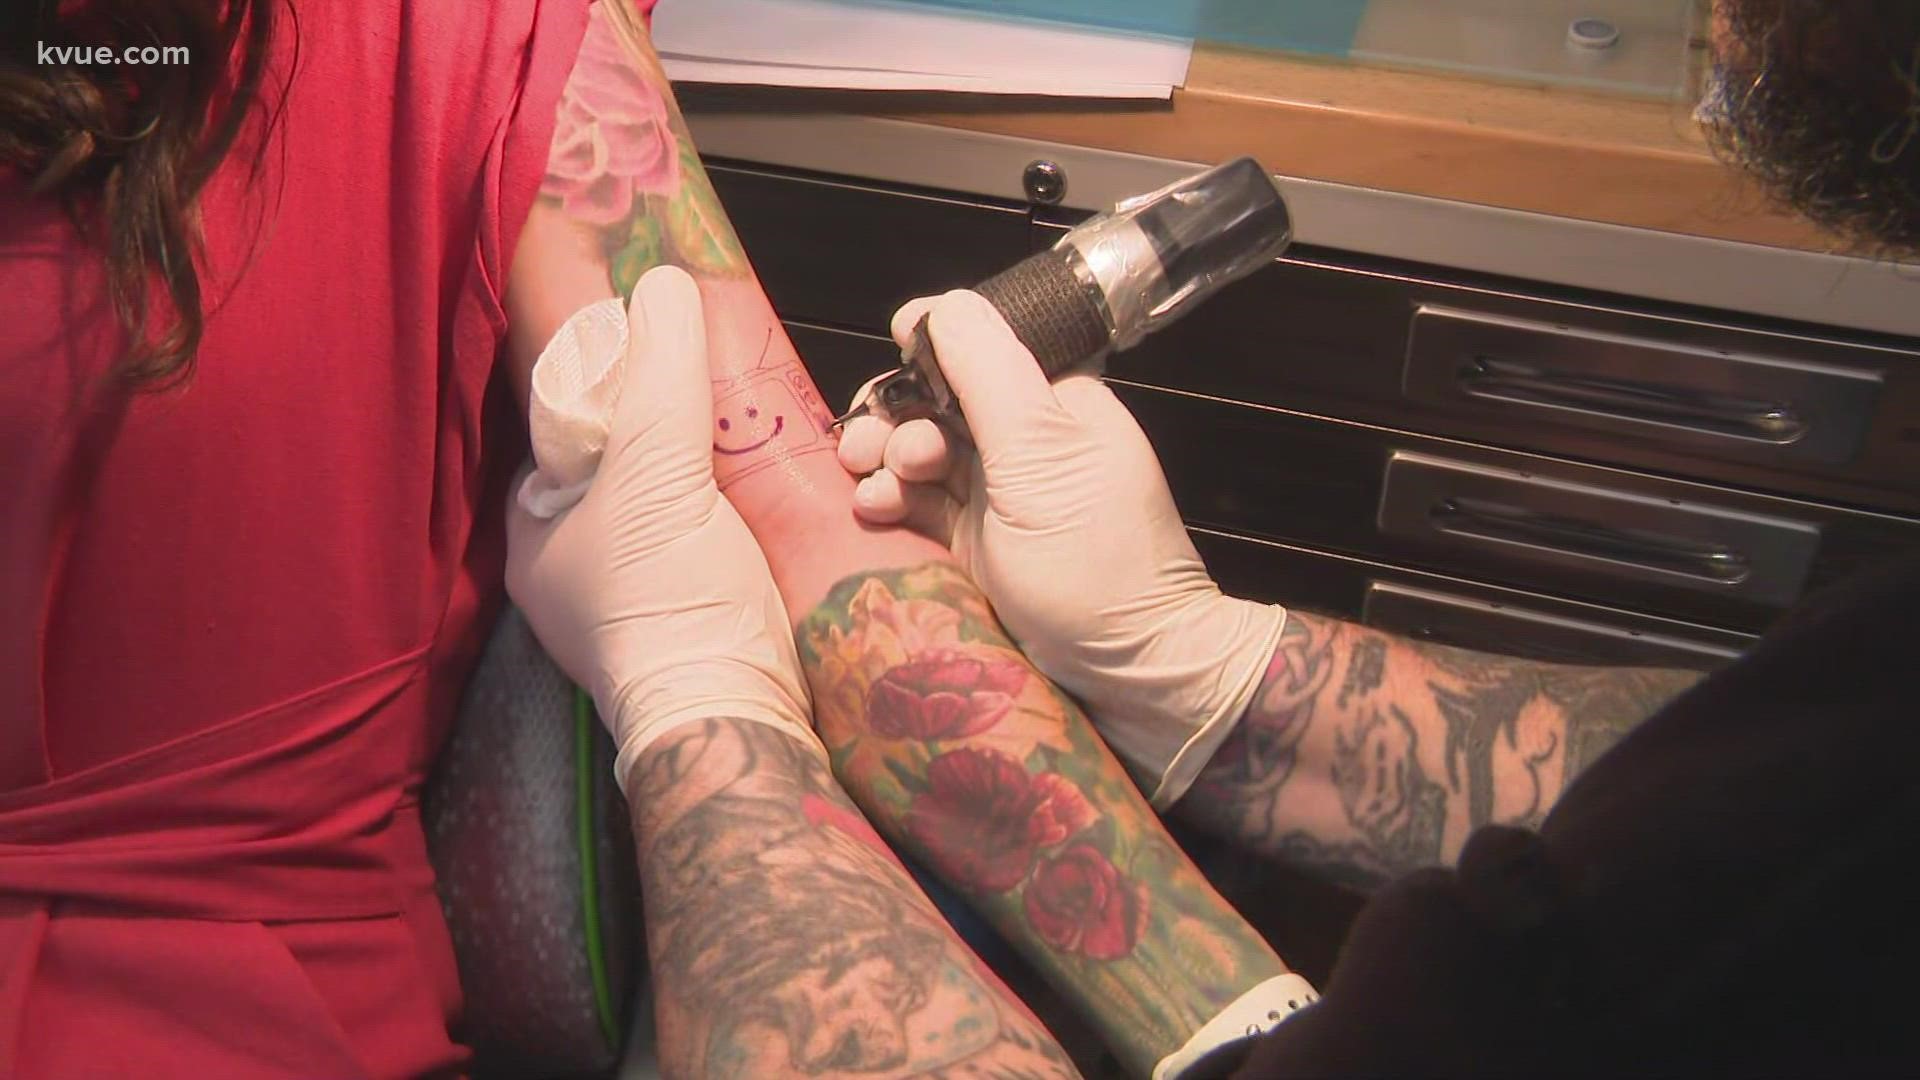 KVUE's Brittany Flowers supported local by getting a tattoo on live TV at Atomic Tattoo.